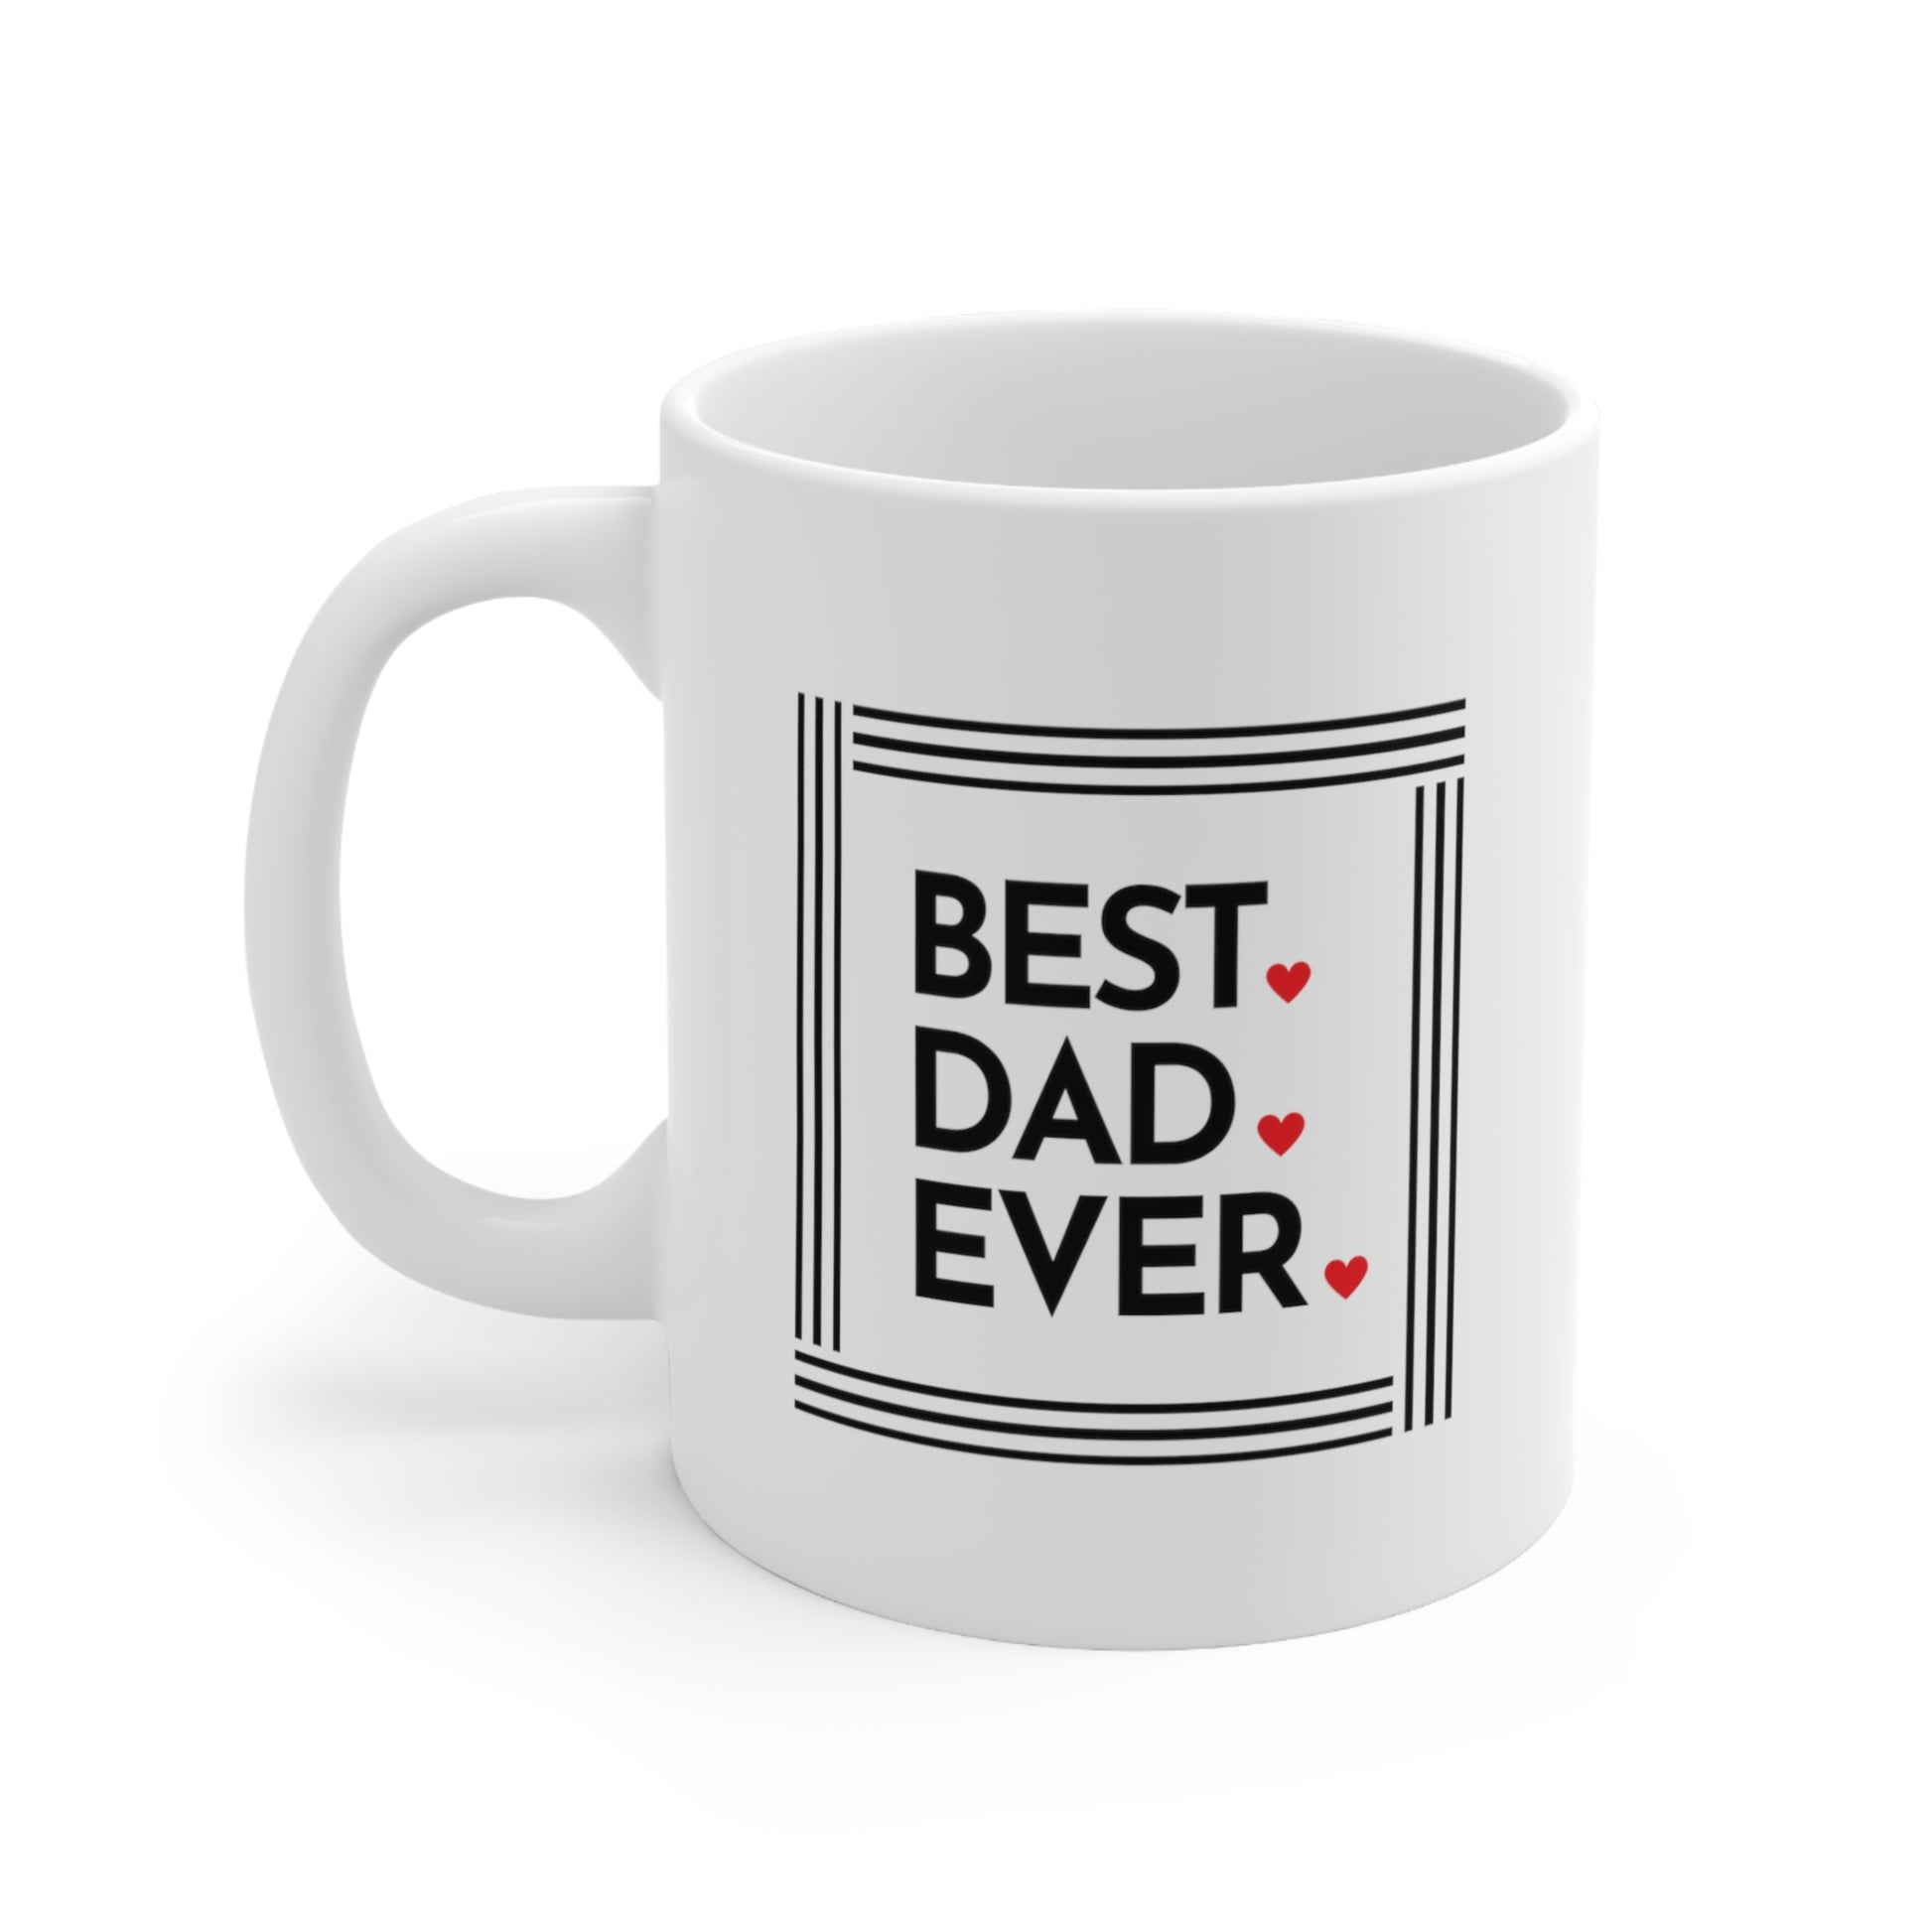 Best Dad Ever Ceramic Mug, Best Gifts for Father's Day